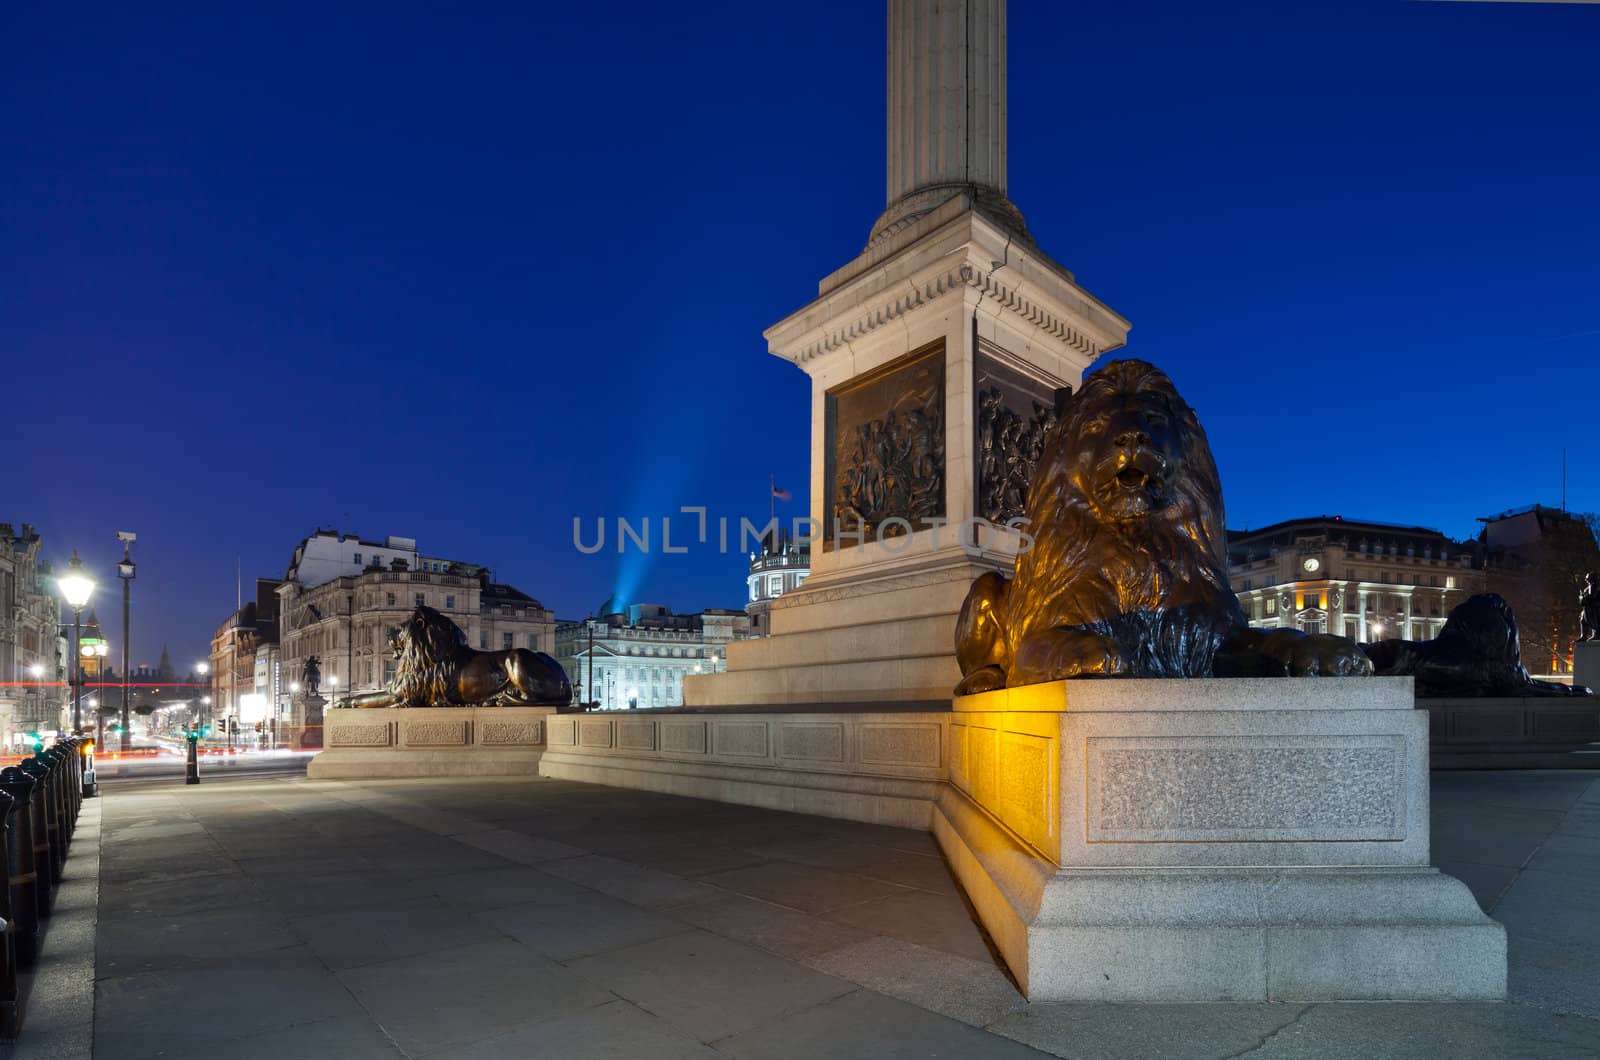 Pedestal Nelson's Column in Trafalgar Square with four lions lyi by Antartis